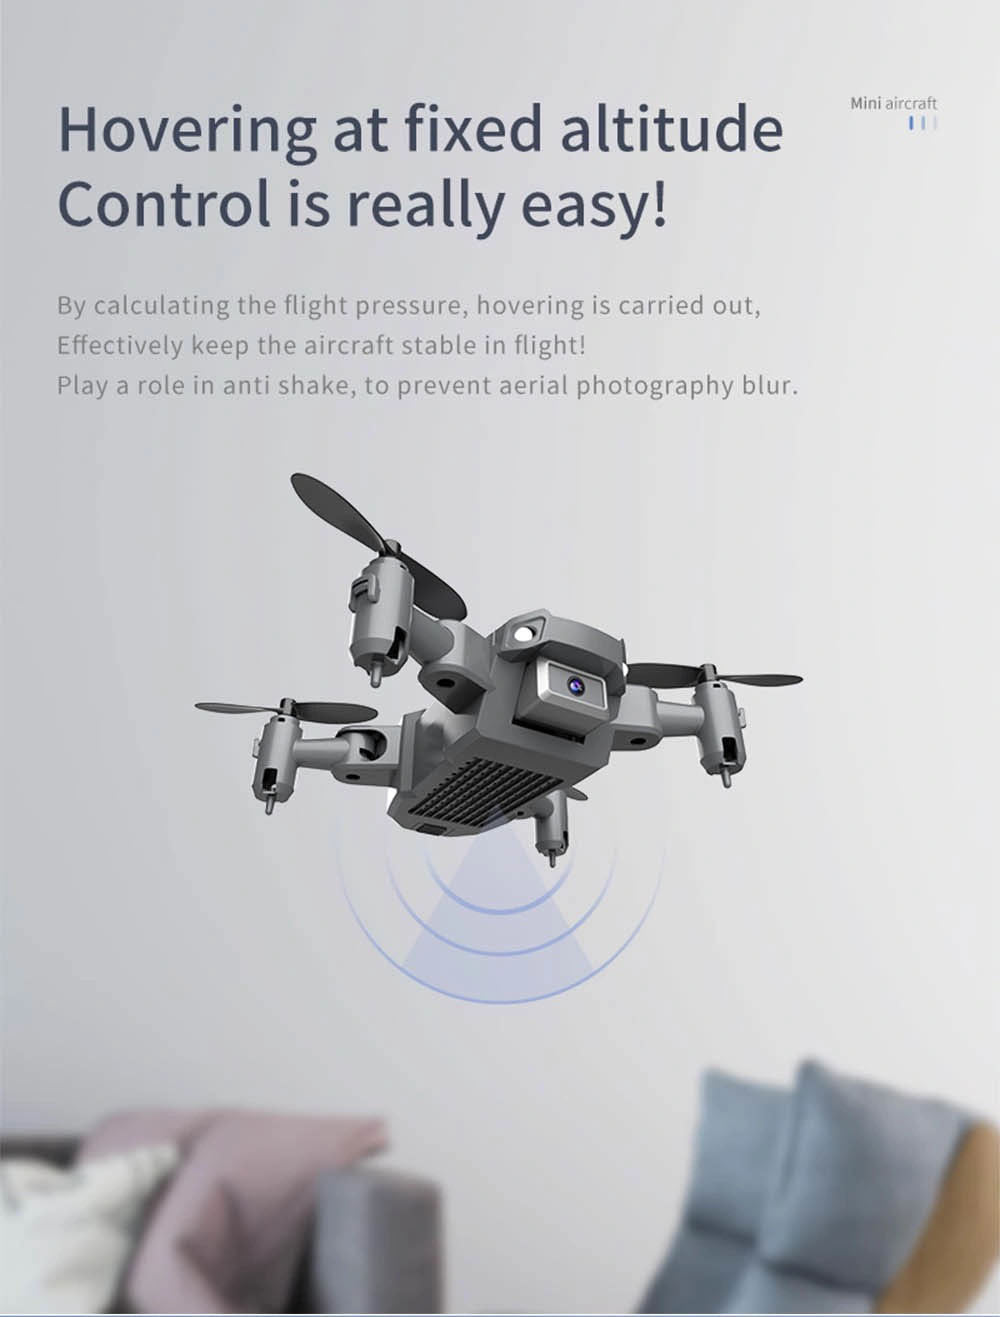 KY905 Mini Drone, mini aircraft hovering at fixed altitude control is really easyl by